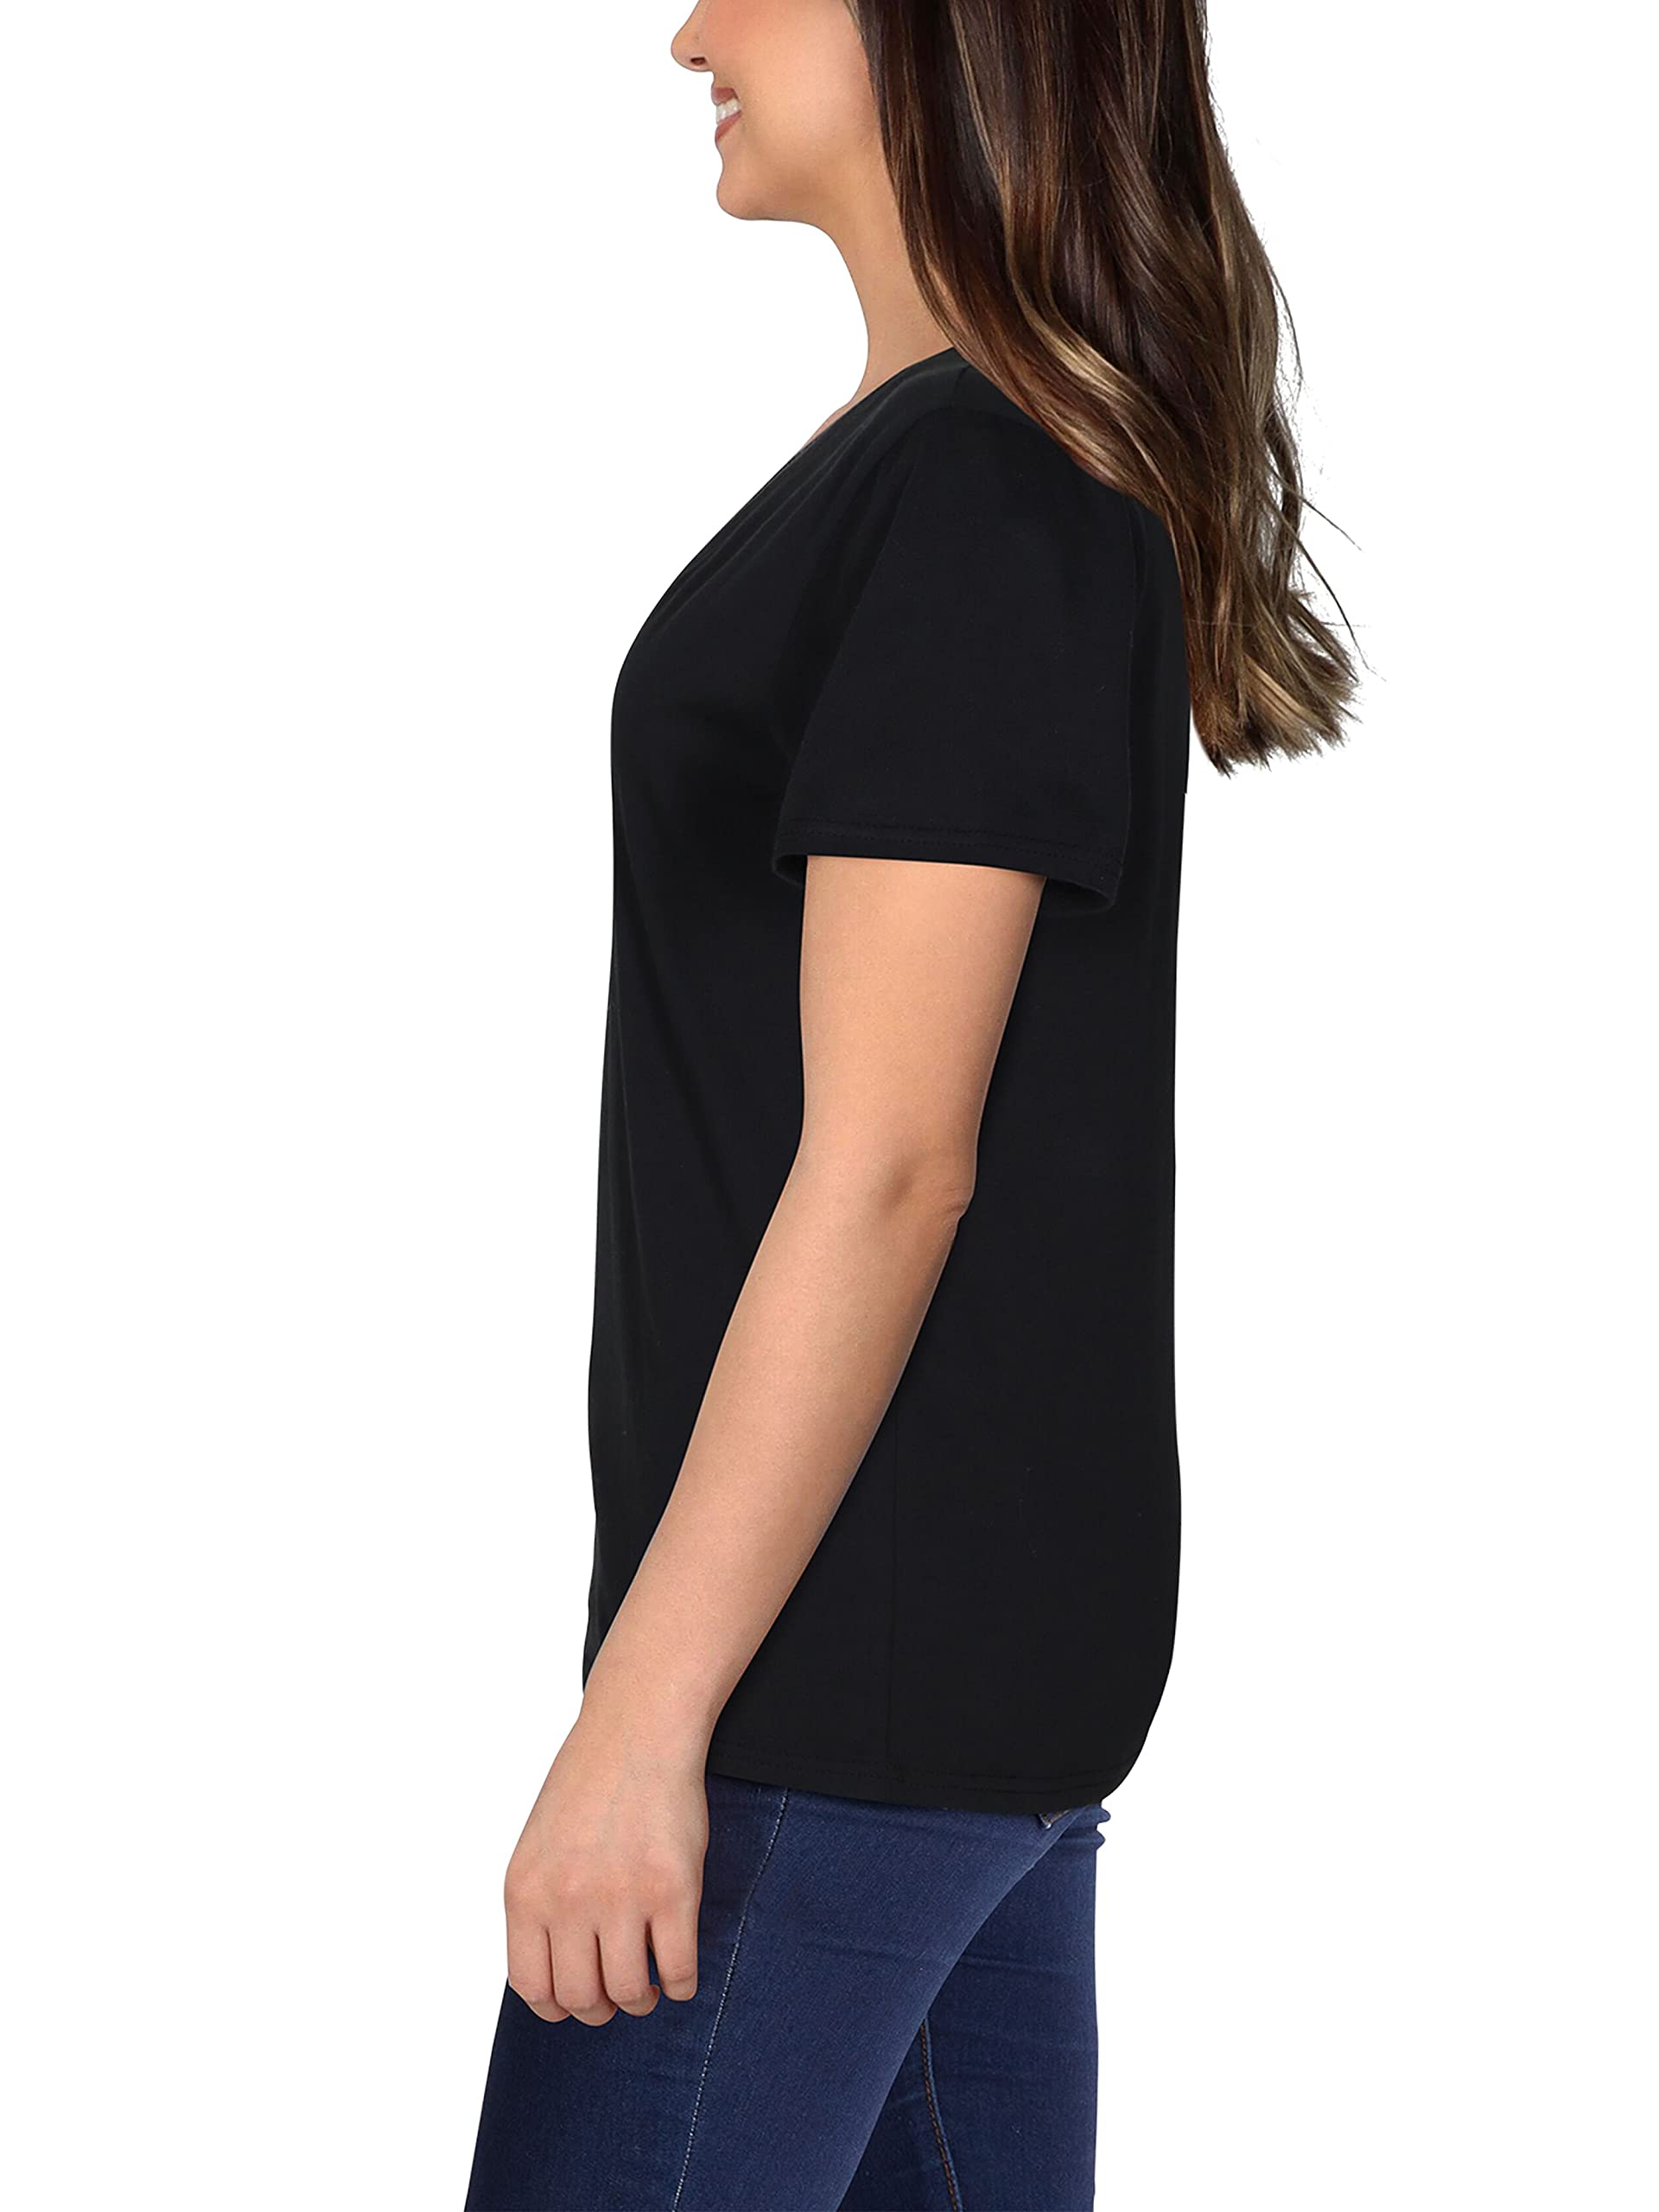 Fruit of the Loom Women’s Crafted Comfort™ Pima Cotton Short Sleeve T-shirts